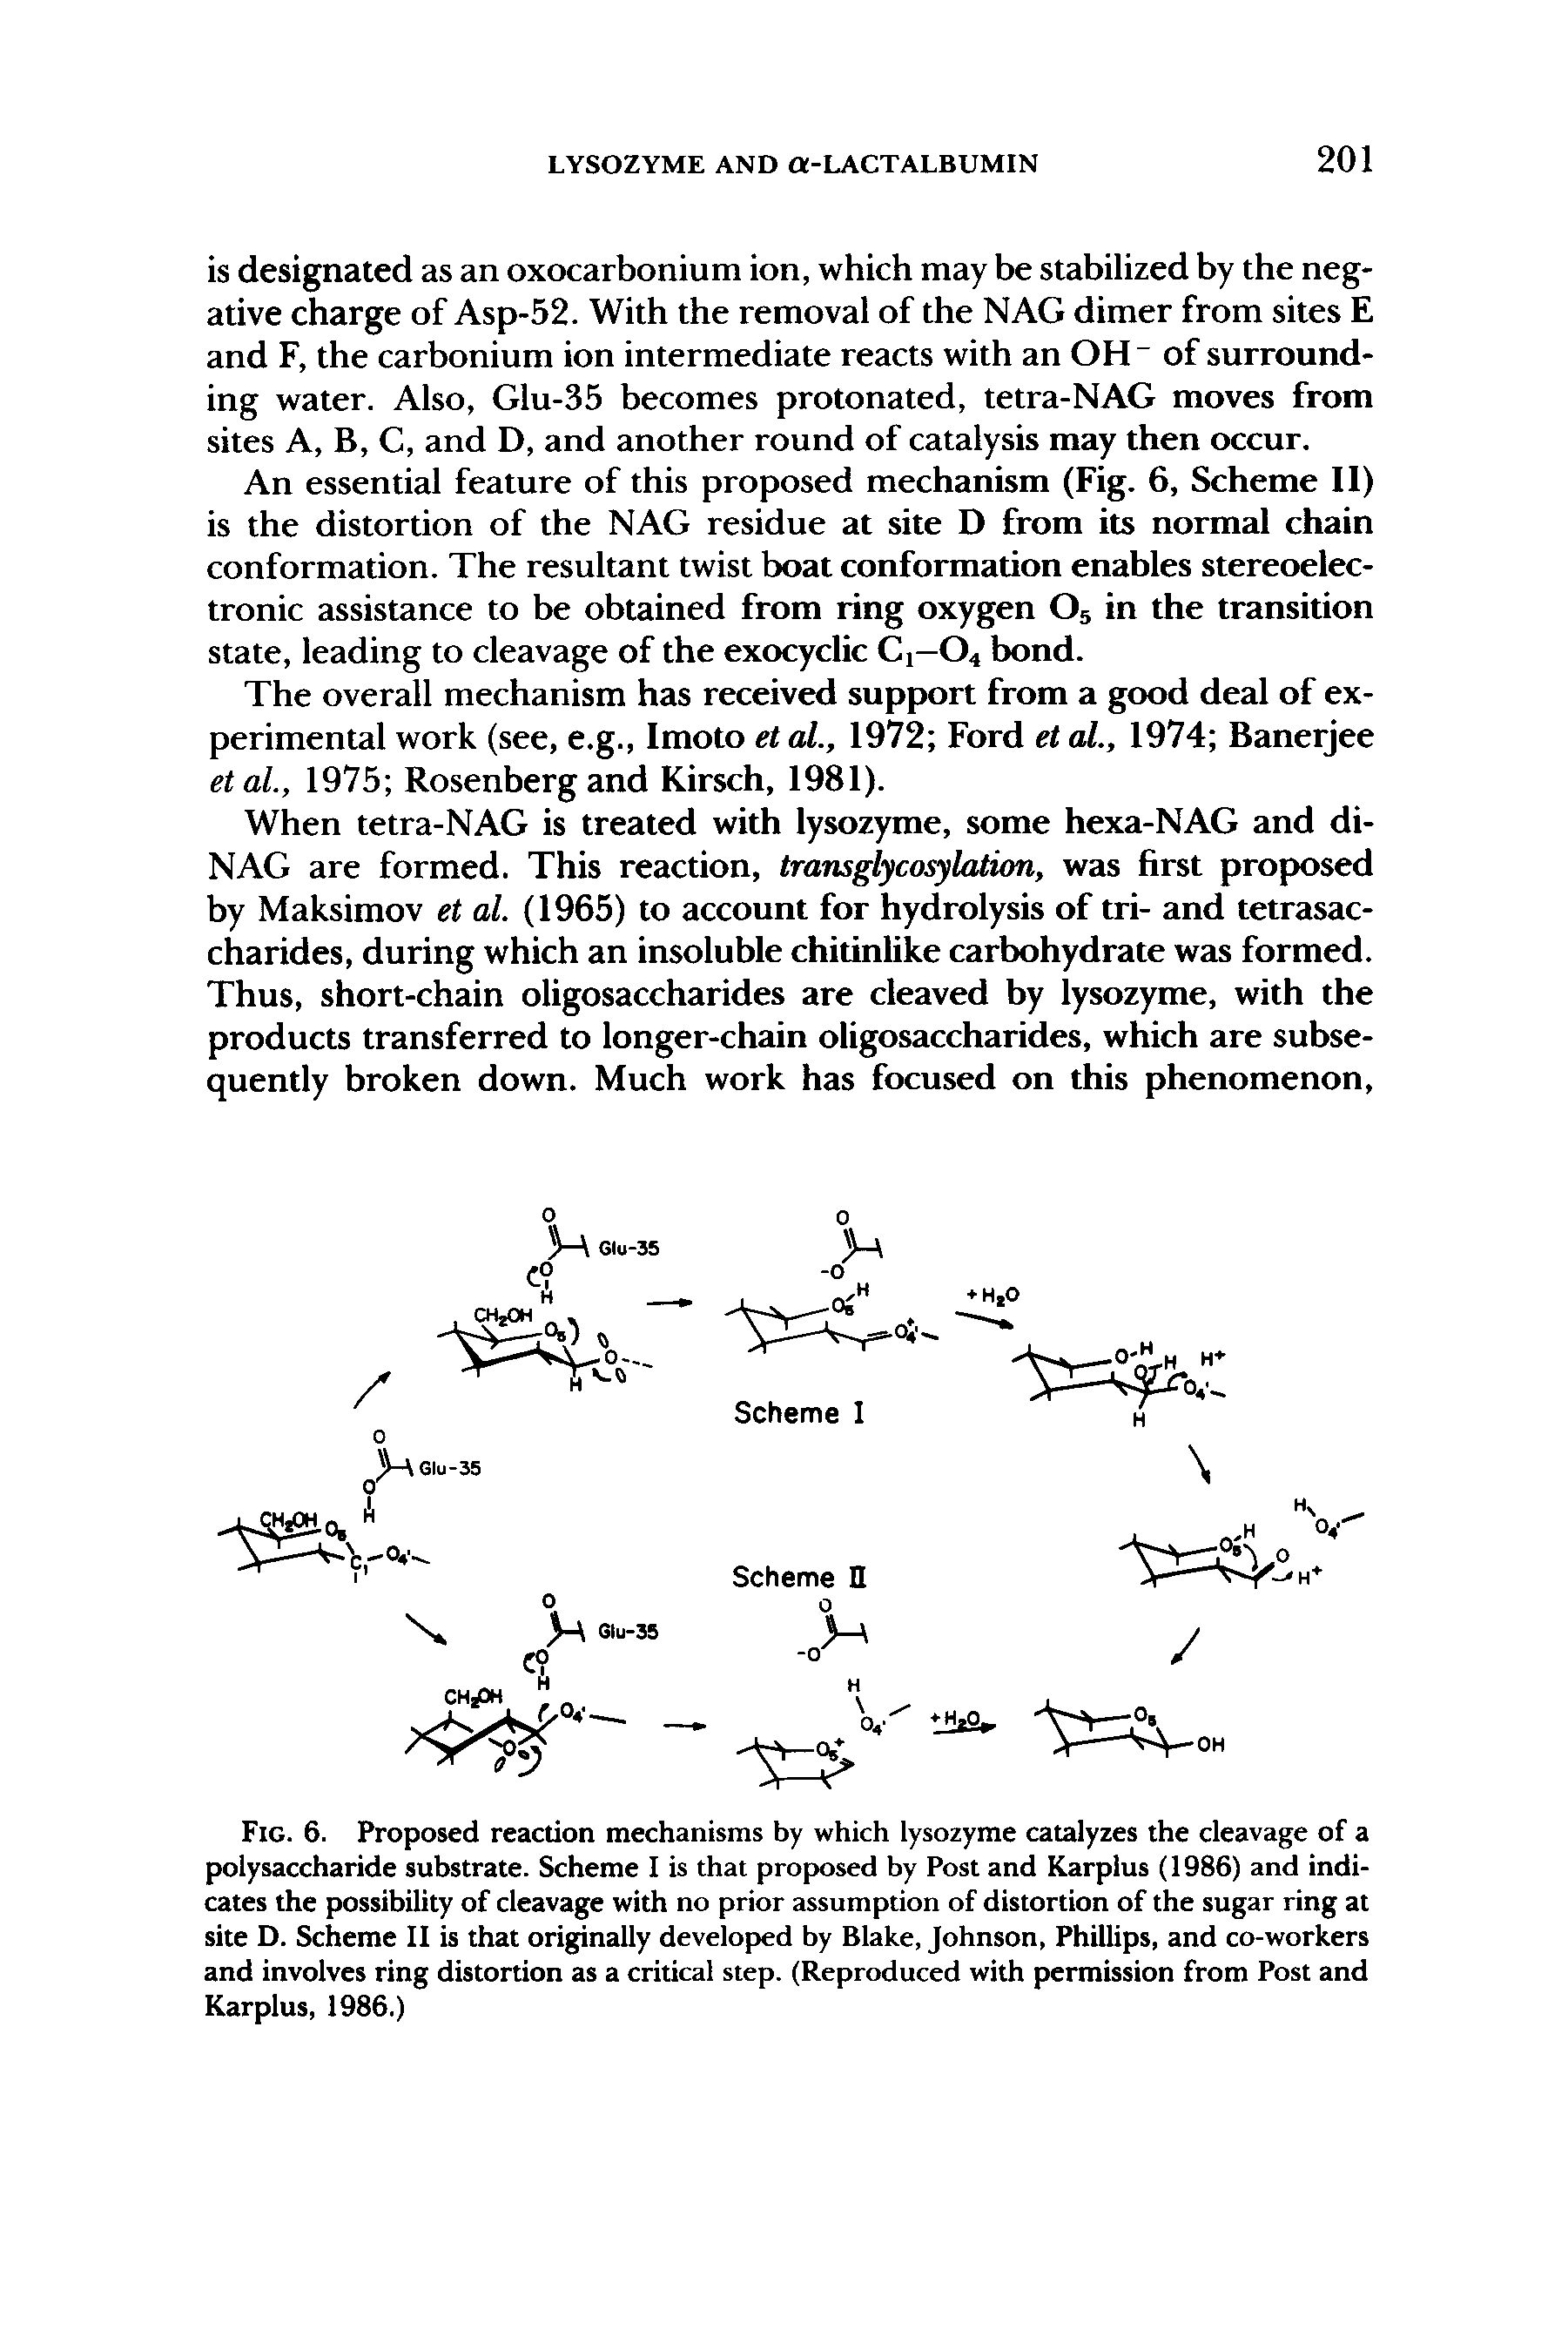 Fig. 6. Proposed reaction mechanisms by which lysozyme catalyzes the cleavage of a polysaccharide substrate. Scheme I is that proposed by Post and Karplus (1986) and indicates the possibility of cleavage with no prior assumption of distortion of the sugar ring at site D. Scheme II is that originally developed by Blake, Johnson, Phillips, and co-workers and involves ring distortion as a critical step. (Reproduced with permission from Post and Karplus, 1986.)...